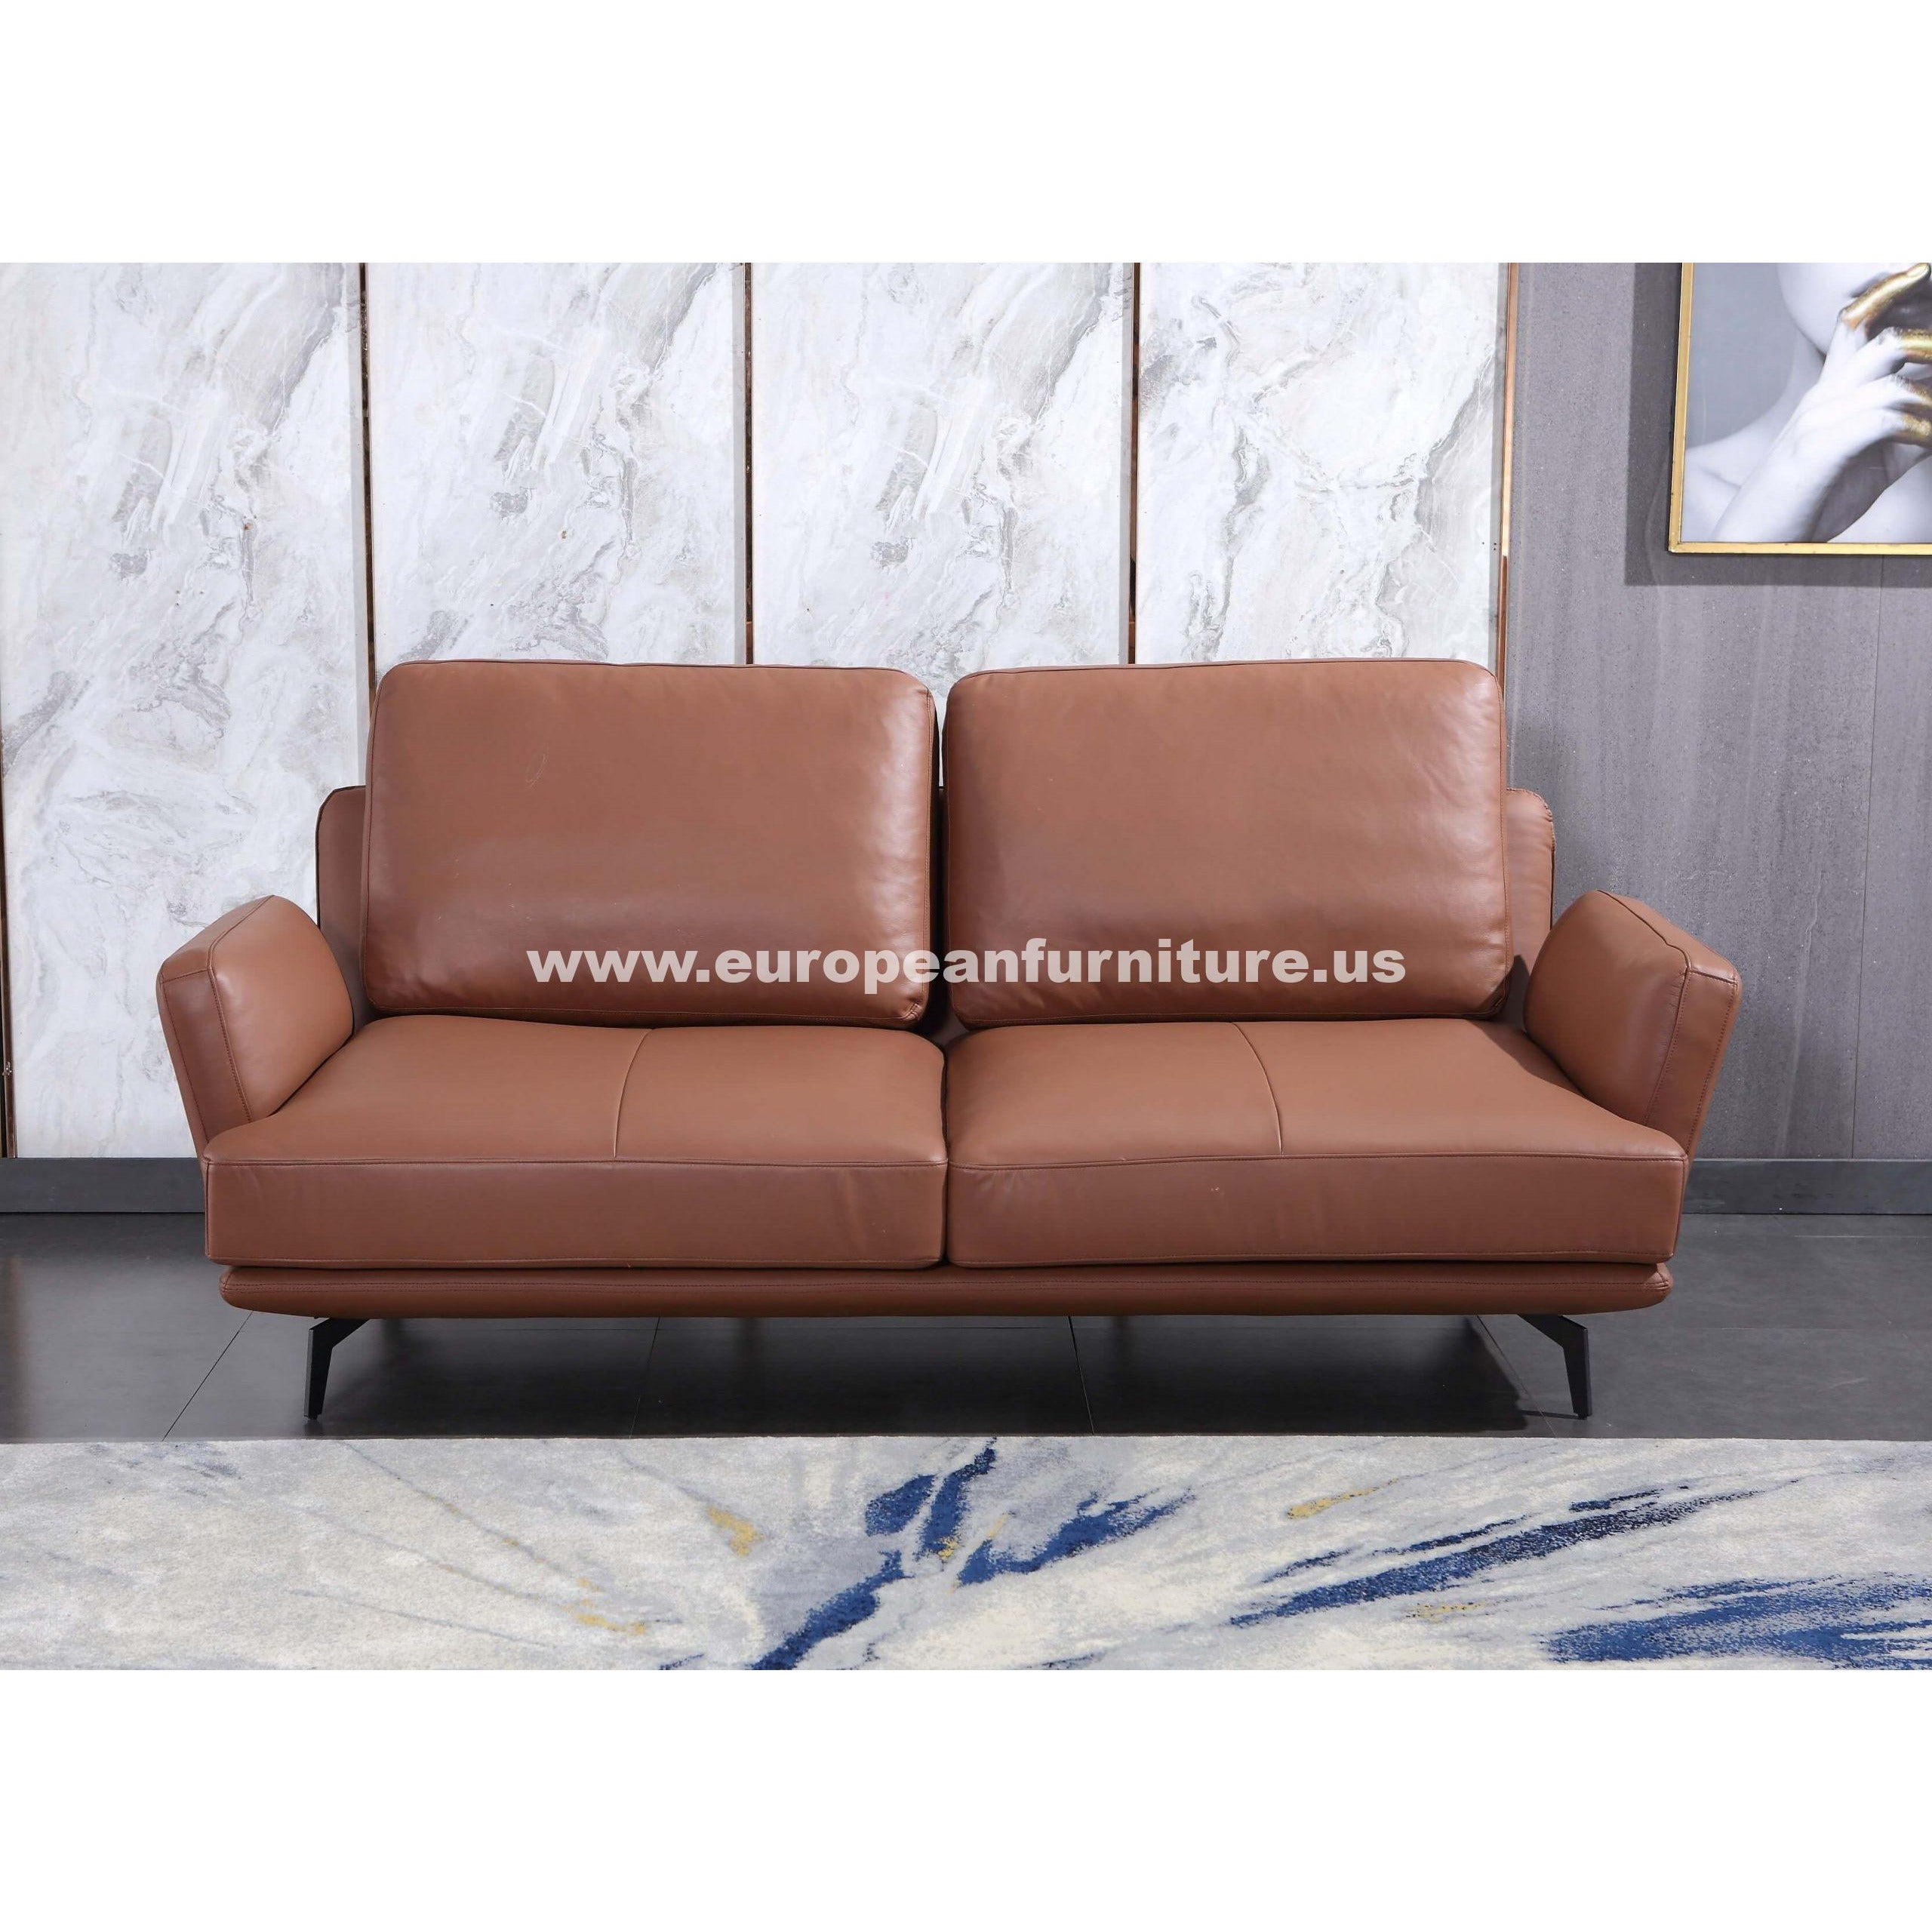 European Furniture - Tratto 3 Piece Sofa Set Russet Brown Italian Leather - EF-37455 - New Star Living